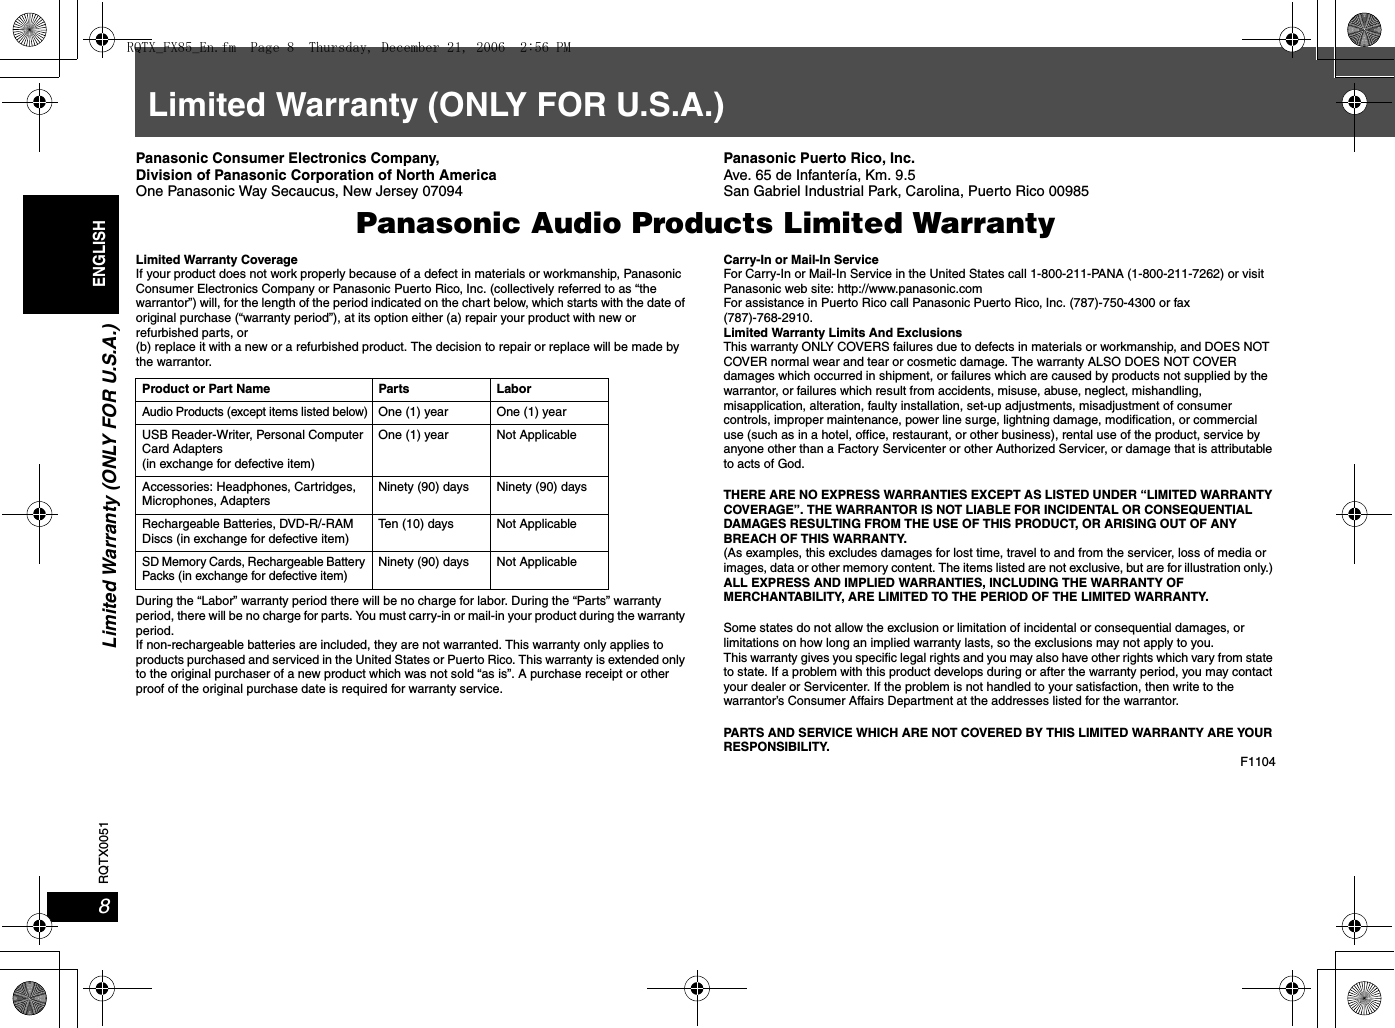 Limited Warranty (ONLY FOR U.S.A.)8RQTX0051ENGLISHLimited Warranty (ONLY FOR U.S.A.)Panasonic Consumer Electronics Company, Division of Panasonic Corporation of North AmericaOne Panasonic Way Secaucus, New Jersey 07094Panasonic Puerto Rico, Inc.Ave. 65 de Infantería, Km. 9.5 San Gabriel Industrial Park, Carolina, Puerto Rico 00985Panasonic Audio Products Limited WarrantyLimited Warranty CoverageIf your product does not work properly because of a defect in materials or workmanship, Panasonic Consumer Electronics Company or Panasonic Puerto Rico, Inc. (collectively referred to as “the warrantor”) will, for the length of the period indicated on the chart below, which starts with the date of original purchase (“warranty period”), at its option either (a) repair your product with new or refurbished parts, or (b) replace it with a new or a refurbished product. The decision to repair or replace will be made by the warrantor.During the “Labor” warranty period there will be no charge for labor. During the “Parts” warranty period, there will be no charge for parts. You must carry-in or mail-in your product during the warranty period. If non-rechargeable batteries are included, they are not warranted. This warranty only applies to products purchased and serviced in the United States or Puerto Rico. This warranty is extended only to the original purchaser of a new product which was not sold “as is”. A purchase receipt or other proof of the original purchase date is required for warranty service.Carry-In or Mail-In ServiceFor Carry-In or Mail-In Service in the United States call 1-800-211-PANA (1-800-211-7262) or visit Panasonic web site: http://www.panasonic.comFor assistance in Puerto Rico call Panasonic Puerto Rico, Inc. (787)-750-4300 or fax(787)-768-2910. Limited Warranty Limits And ExclusionsThis warranty ONLY COVERS failures due to defects in materials or workmanship, and DOES NOT COVER normal wear and tear or cosmetic damage. The warranty ALSO DOES NOT COVER damages which occurred in shipment, or failures which are caused by products not supplied by the warrantor, or failures which result from accidents, misuse, abuse, neglect, mishandling, misapplication, alteration, faulty installation, set-up adjustments, misadjustment of consumer controls, improper maintenance, power line surge, lightning damage, modification, or commercial use (such as in a hotel, office, restaurant, or other business), rental use of the product, service by anyone other than a Factory Servicenter or other Authorized Servicer, or damage that is attributable to acts of God.THERE ARE NO EXPRESS WARRANTIES EXCEPT AS LISTED UNDER “LIMITED WARRANTY COVERAGE”. THE WARRANTOR IS NOT LIABLE FOR INCIDENTAL OR CONSEQUENTIAL DAMAGES RESULTING FROM THE USE OF THIS PRODUCT, OR ARISING OUT OF ANY BREACH OF THIS WARRANTY. (As examples, this excludes damages for lost time, travel to and from the servicer, loss of media or images, data or other memory content. The items listed are not exclusive, but are for illustration only.) ALL EXPRESS AND IMPLIED WARRANTIES, INCLUDING THE WARRANTY OF MERCHANTABILITY, ARE LIMITED TO THE PERIOD OF THE LIMITED WARRANTY.Some states do not allow the exclusion or limitation of incidental or consequential damages, or limitations on how long an implied warranty lasts, so the exclusions may not apply to you.This warranty gives you specific legal rights and you may also have other rights which vary from state to state. If a problem with this product develops during or after the warranty period, you may contact your dealer or Servicenter. If the problem is not handled to your satisfaction, then write to the warrantor’s Consumer Affairs Department at the addresses listed for the warrantor.PARTS AND SERVICE WHICH ARE NOT COVERED BY THIS LIMITED WARRANTY ARE YOUR RESPONSIBILITY.F1104Product or Part Name Parts LaborAudio Products (except items listed below)One (1) year  One (1) yearUSB Reader-Writer, Personal Computer Card Adapters(in exchange for defective item)One (1) year Not ApplicableAccessories: Headphones, Cartridges, Microphones, AdaptersNinety (90) days Ninety (90) daysRechargeable Batteries, DVD-R/-RAM Discs (in exchange for defective item)Ten (10) days Not ApplicableSD Memory Cards, Rechargeable Battery Packs (in exchange for defective item)Ninety (90) days Not ApplicableRQTX_FX85_En.fm  Page 8  Thursday, December 21, 2006  2:56 PM